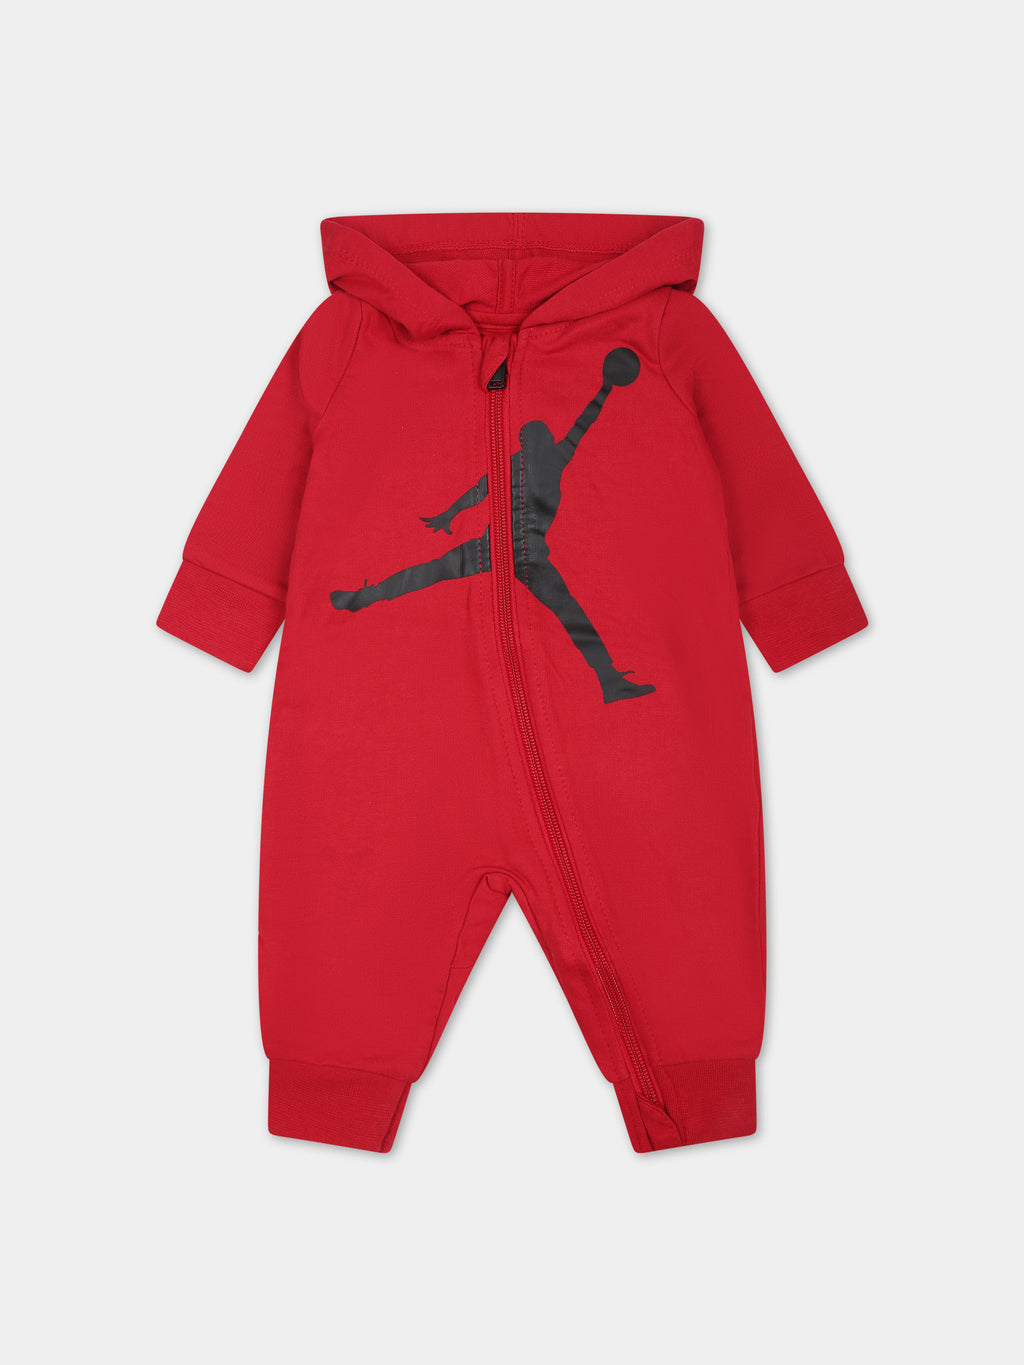 Red babygrow for baby boy with iconic Jumpman